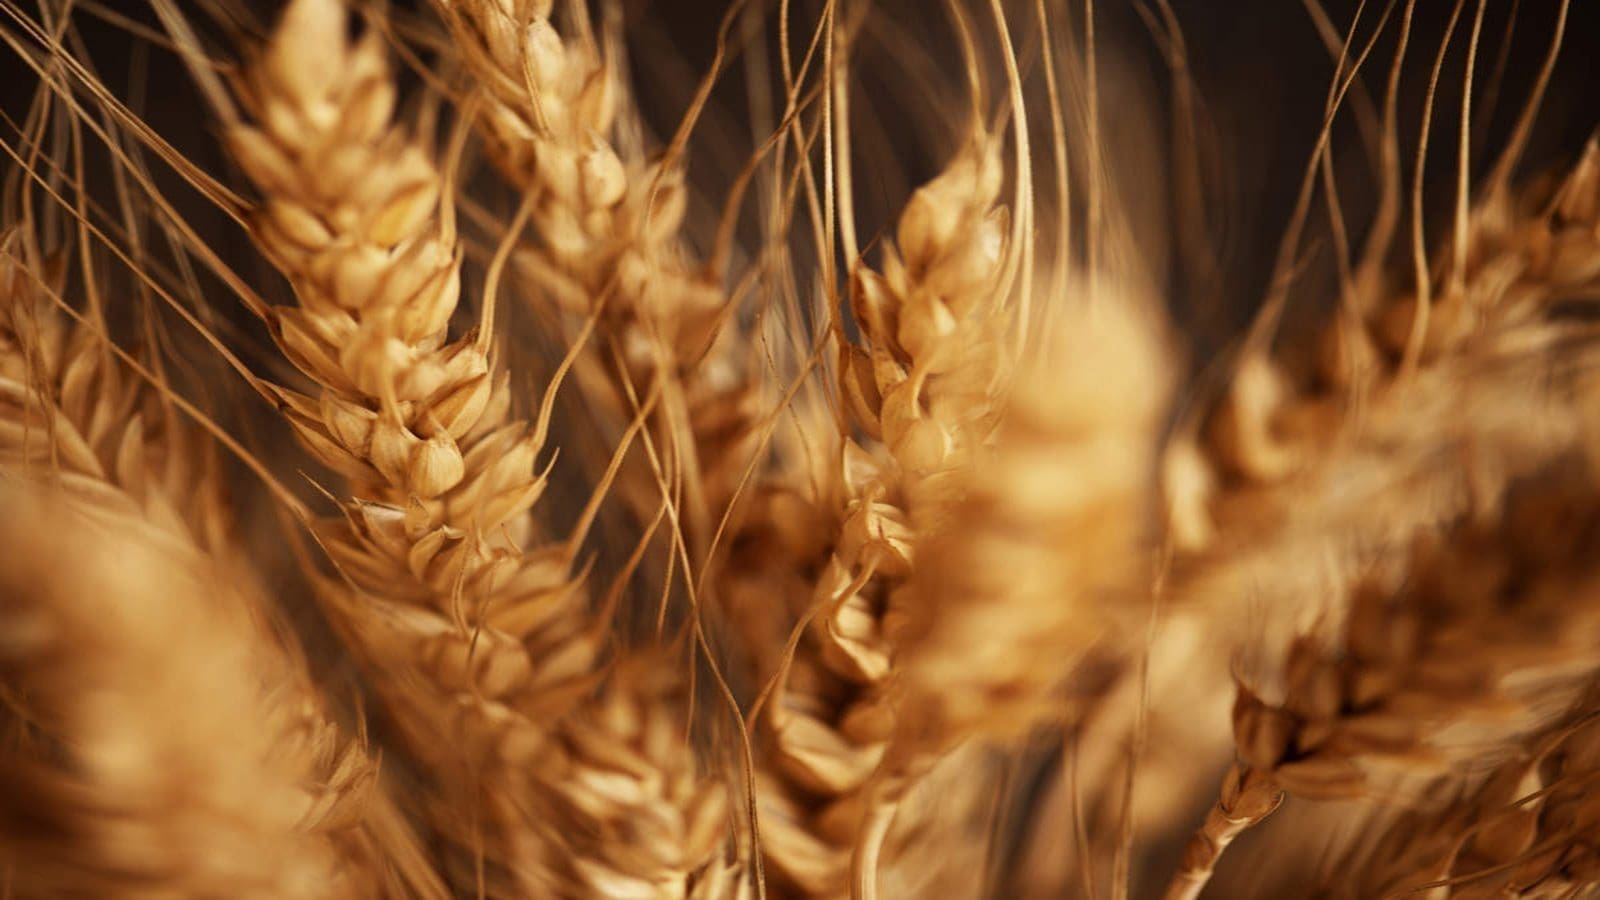 Algerian grain production projected higher owing to favorable policy